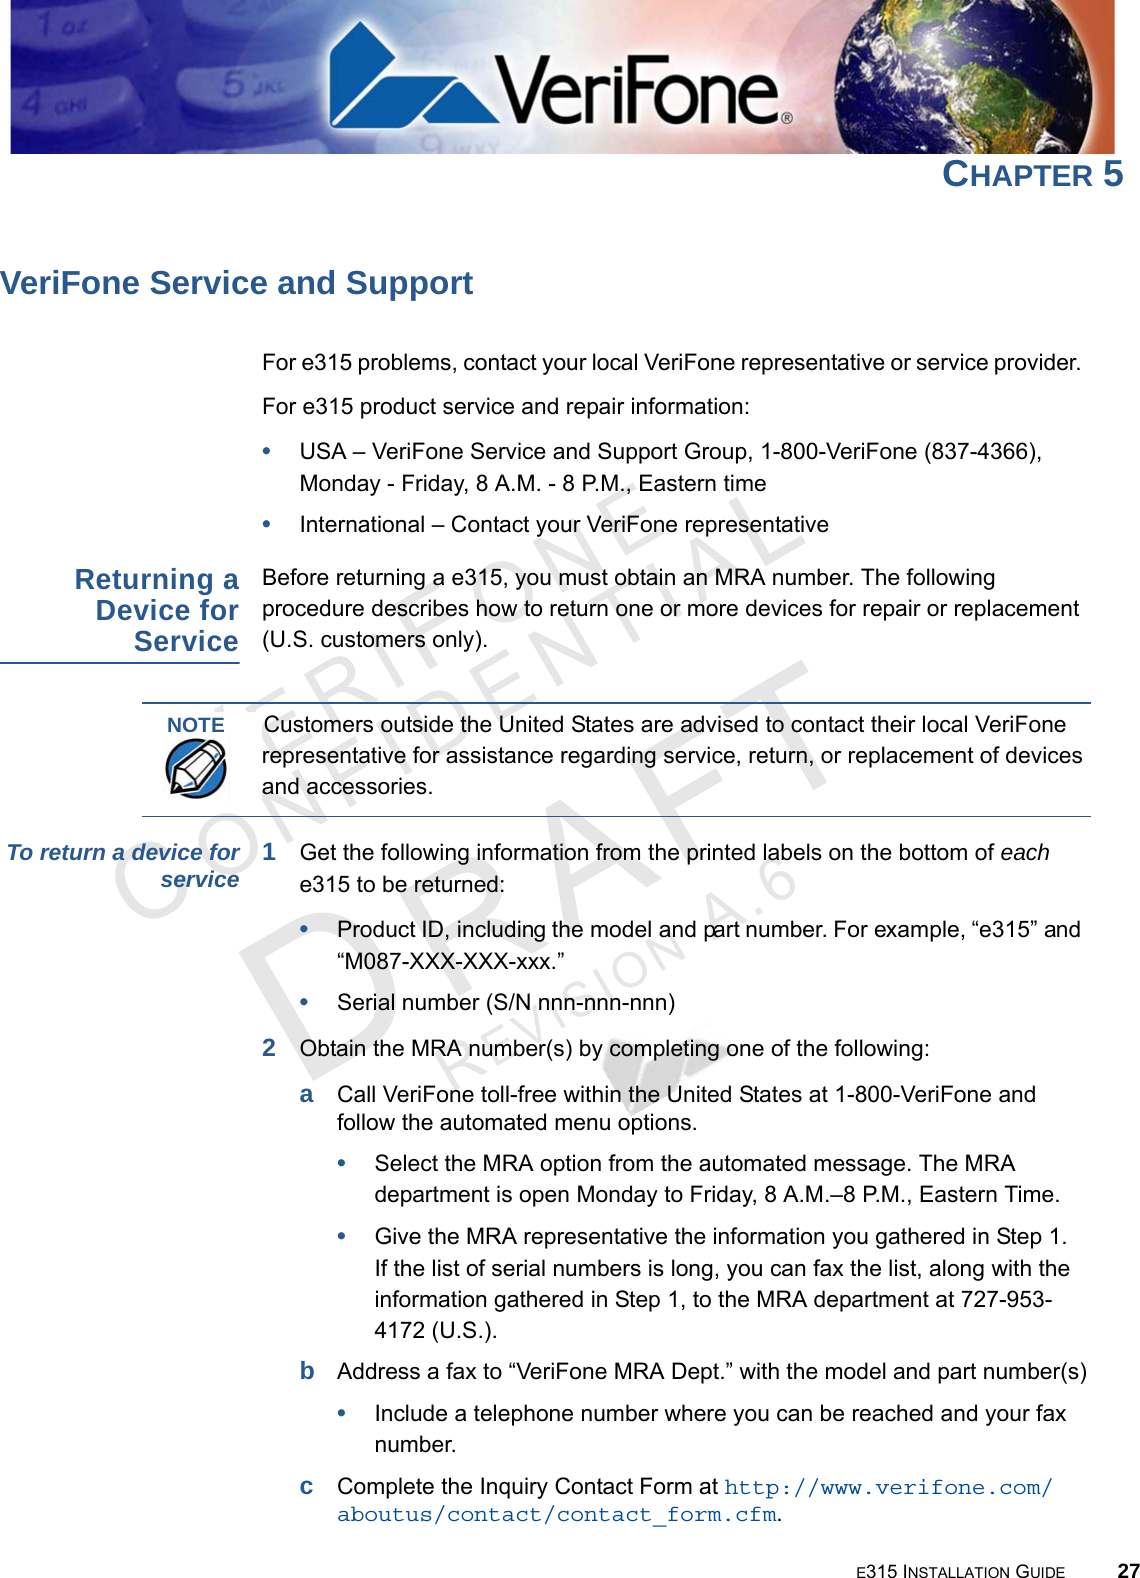 E315 INSTALLATION GUIDE 27VERIFO N ECONF I DENTIALREVISION A.6 CHAPTER 5VeriFone Service and SupportFor e315 problems, contact your local VeriFone representative or service provider. For e315 product service and repair information:•USA – VeriFone Service and Support Group, 1-800-VeriFone (837-4366),  Monday - Friday, 8 A.M. - 8 P.M., Eastern time•International – Contact your VeriFone representative Returning a Device for ServiceBefore returning a e315, you must obtain an MRA number. The following procedure describes how to return one or more devices for repair or replacement (U.S. customers only). To return a device for service 1Get the following information from the printed labels on the bottom of each e315 to be returned:•Product ID, including the model and part number. For example, “e315” and “M087-XXX-XXX-xxx.”•Serial number (S/N nnn-nnn-nnn)2Obtain the MRA number(s) by completing one of the following:aCall VeriFone toll-free within the United States at 1-800-VeriFone and follow the automated menu options.•Select the MRA option from the automated message. The MRA department is open Monday to Friday, 8 A.M.–8 P.M., Eastern Time.•Give the MRA representative the information you gathered in Step 1. If the list of serial numbers is long, you can fax the list, along with the information gathered in Step 1, to the MRA department at 727-953-4172 (U.S.).bAddress a fax to “VeriFone MRA Dept.” with the model and part number(s)•Include a telephone number where you can be reached and your fax number.cComplete the Inquiry Contact Form at http://www.verifone.com/aboutus/contact/contact_form.cfm.NOTECustomers outside the United States are advised to contact their local VeriFone representative for assistance regarding service, return, or replacement of devices and accessories.